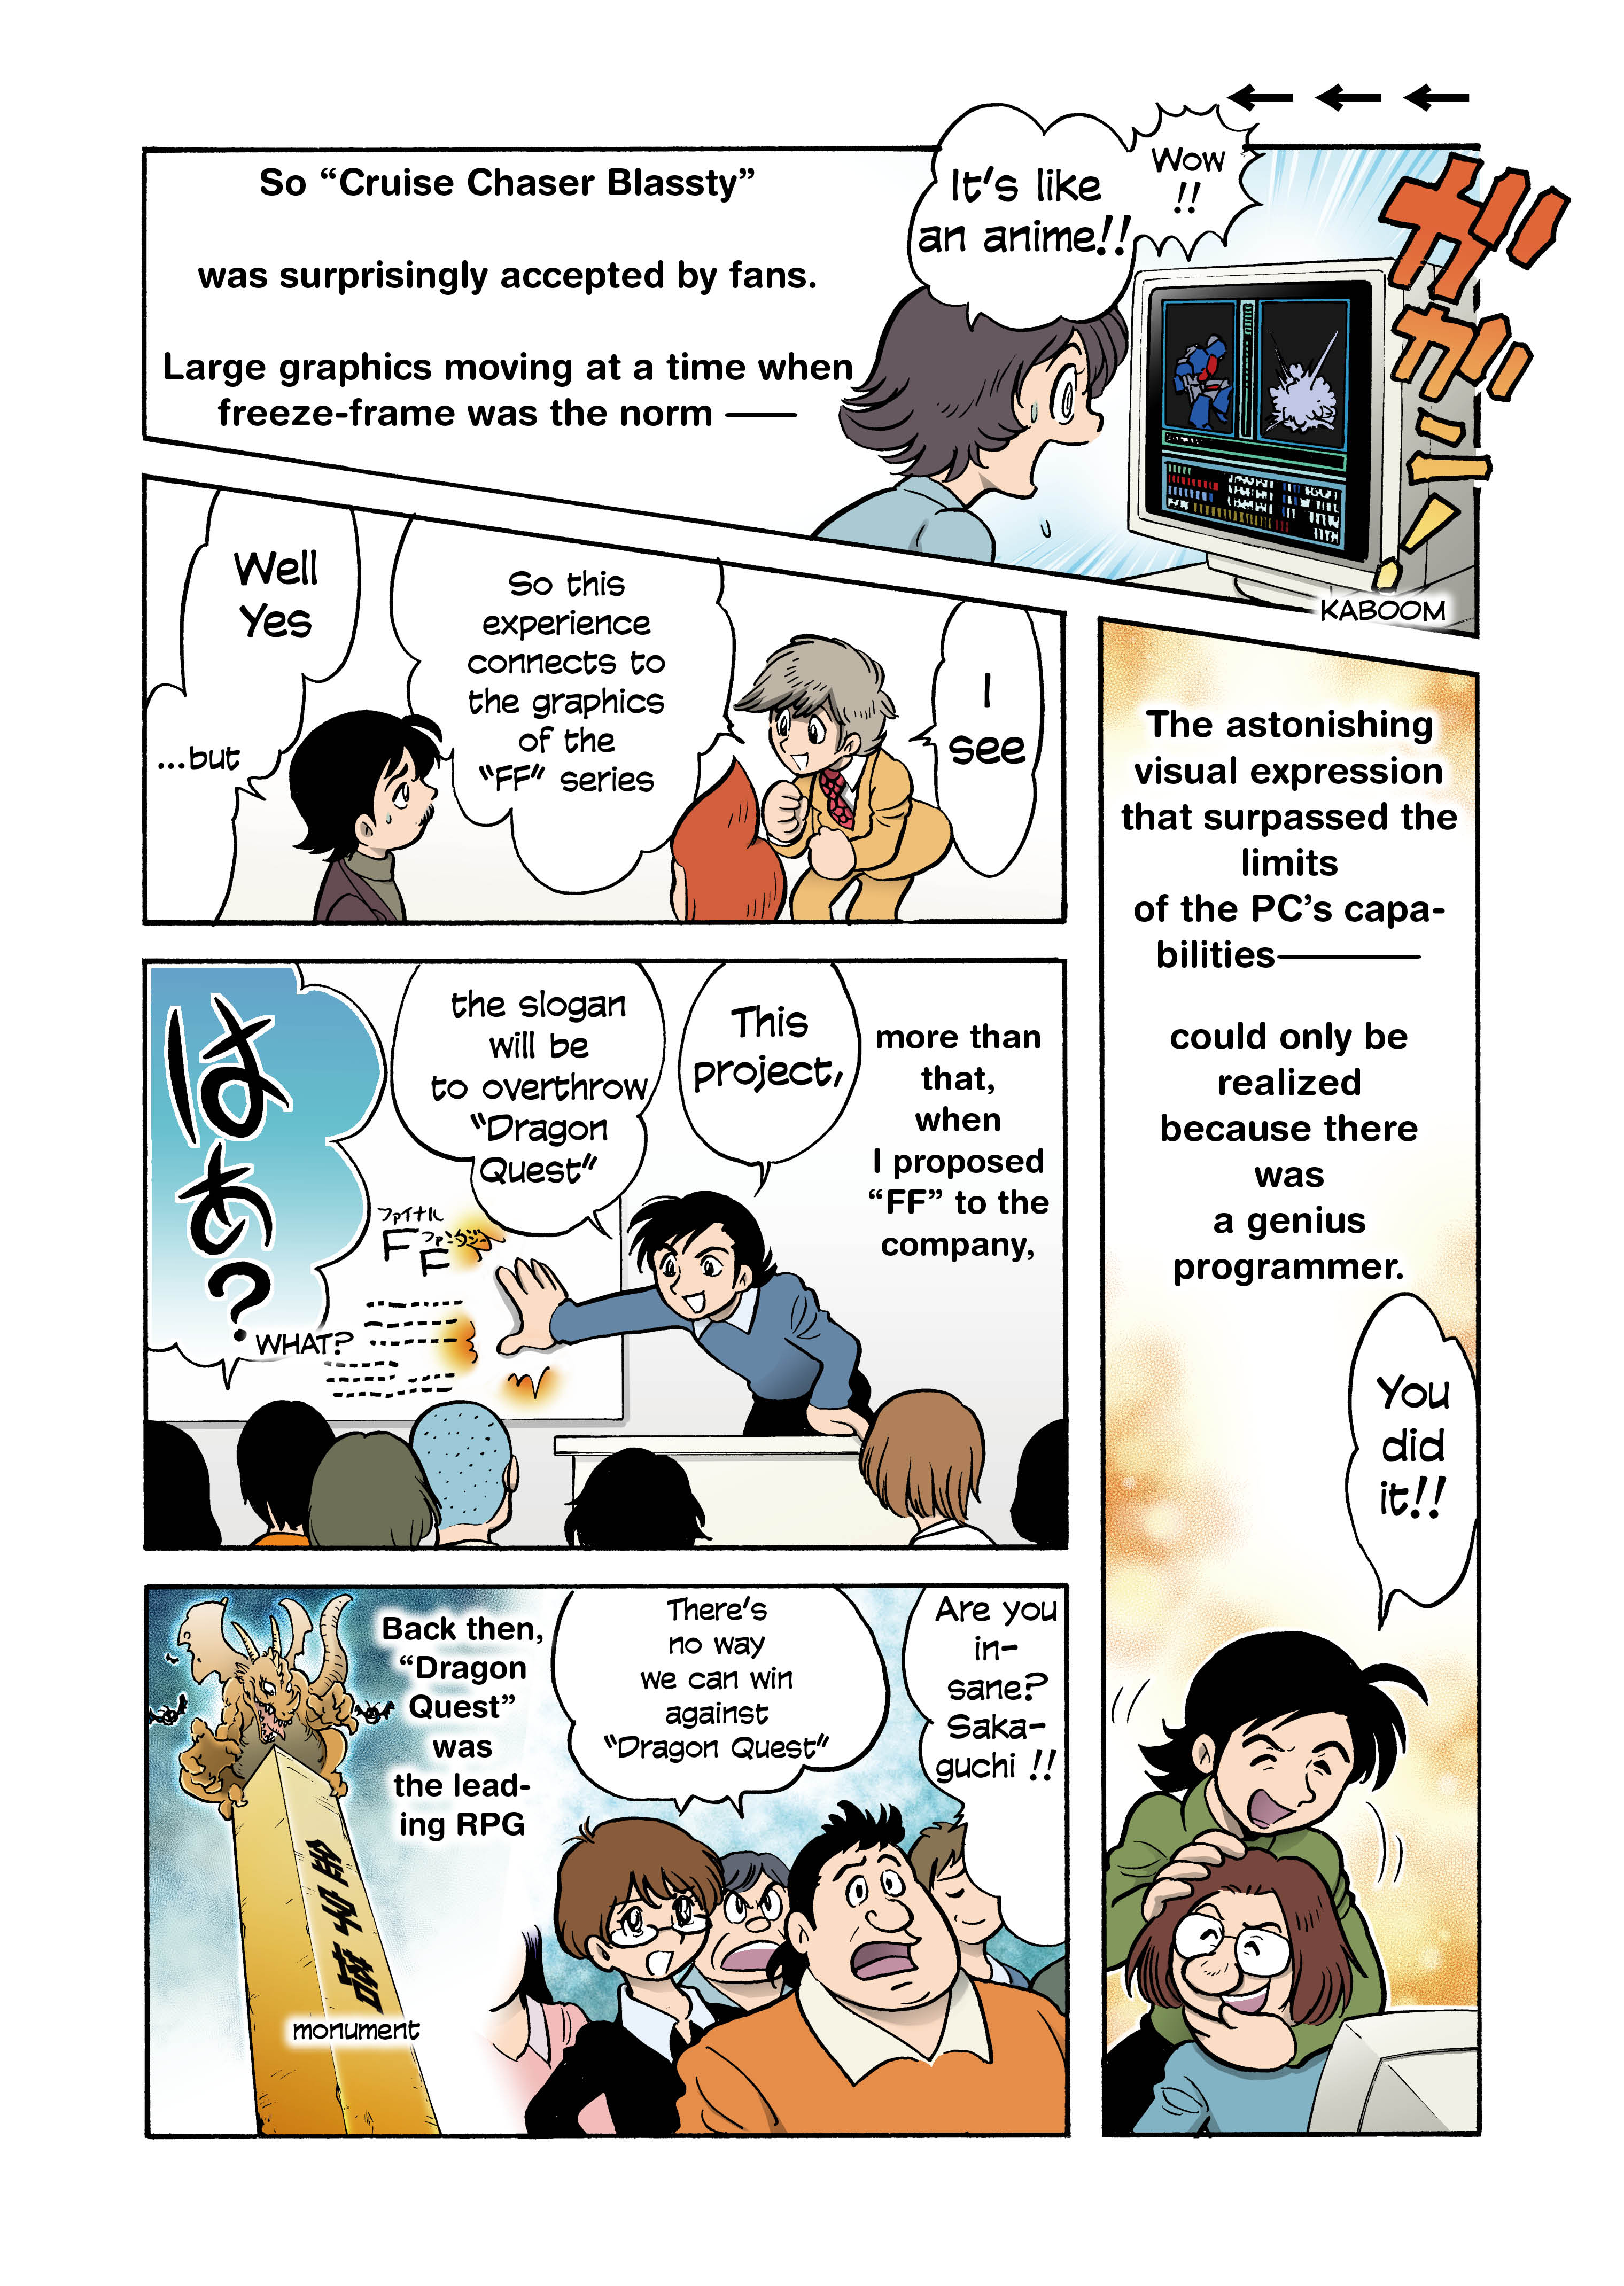 【New Comic Series】Hironobu Sakaguchi and FF programmers’ try to rival DQ [Game Designers in their ‘early’ days]_007